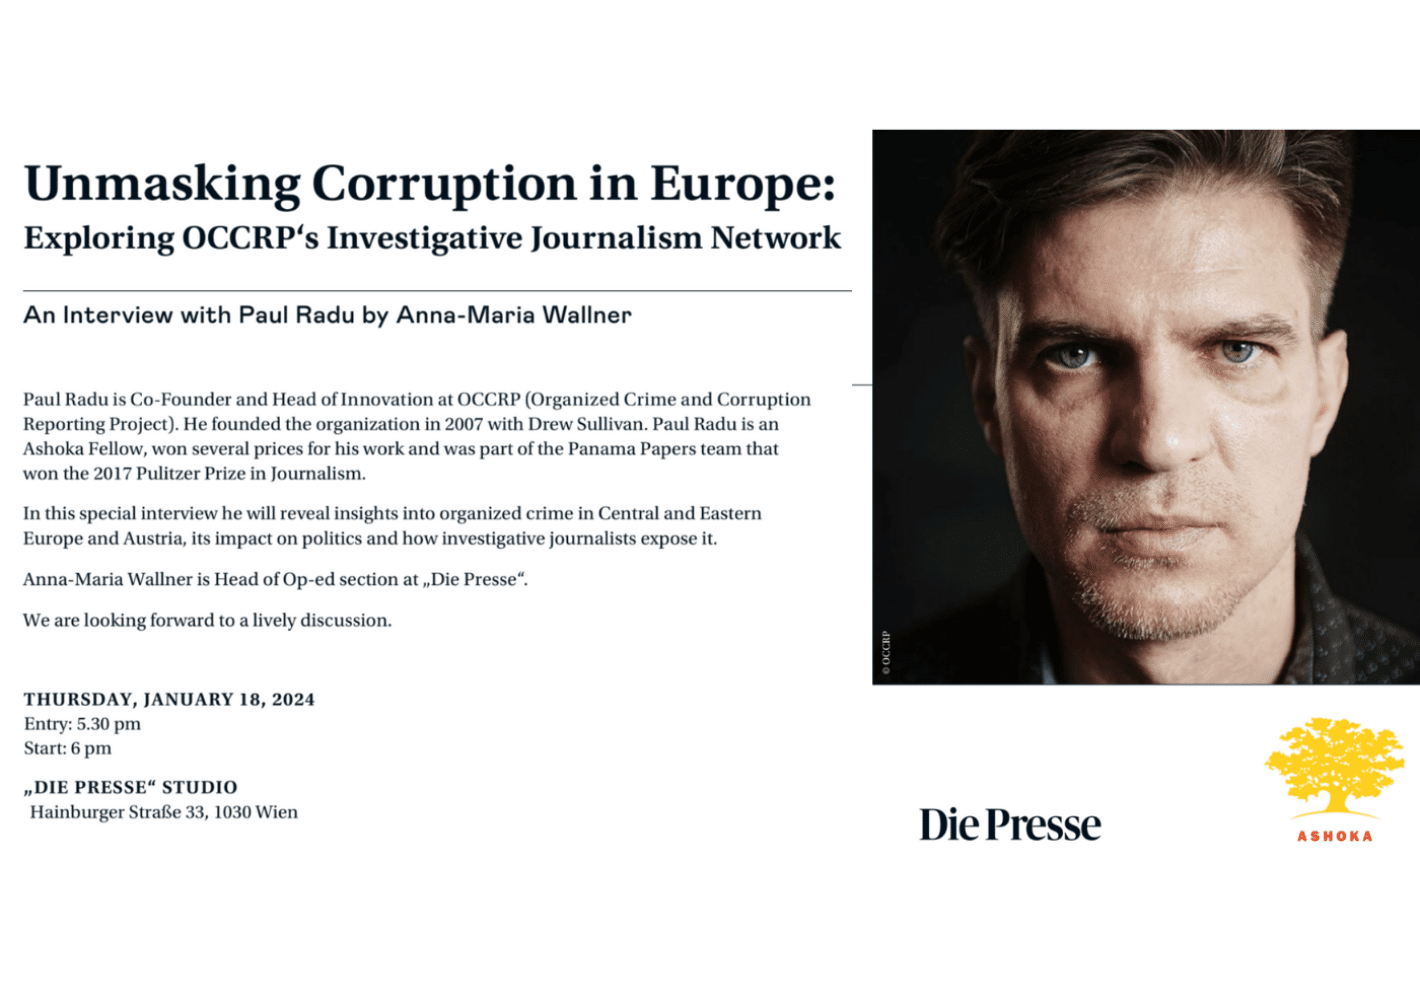 Unmasking Corruption in Europe: An interview with Paul Radu